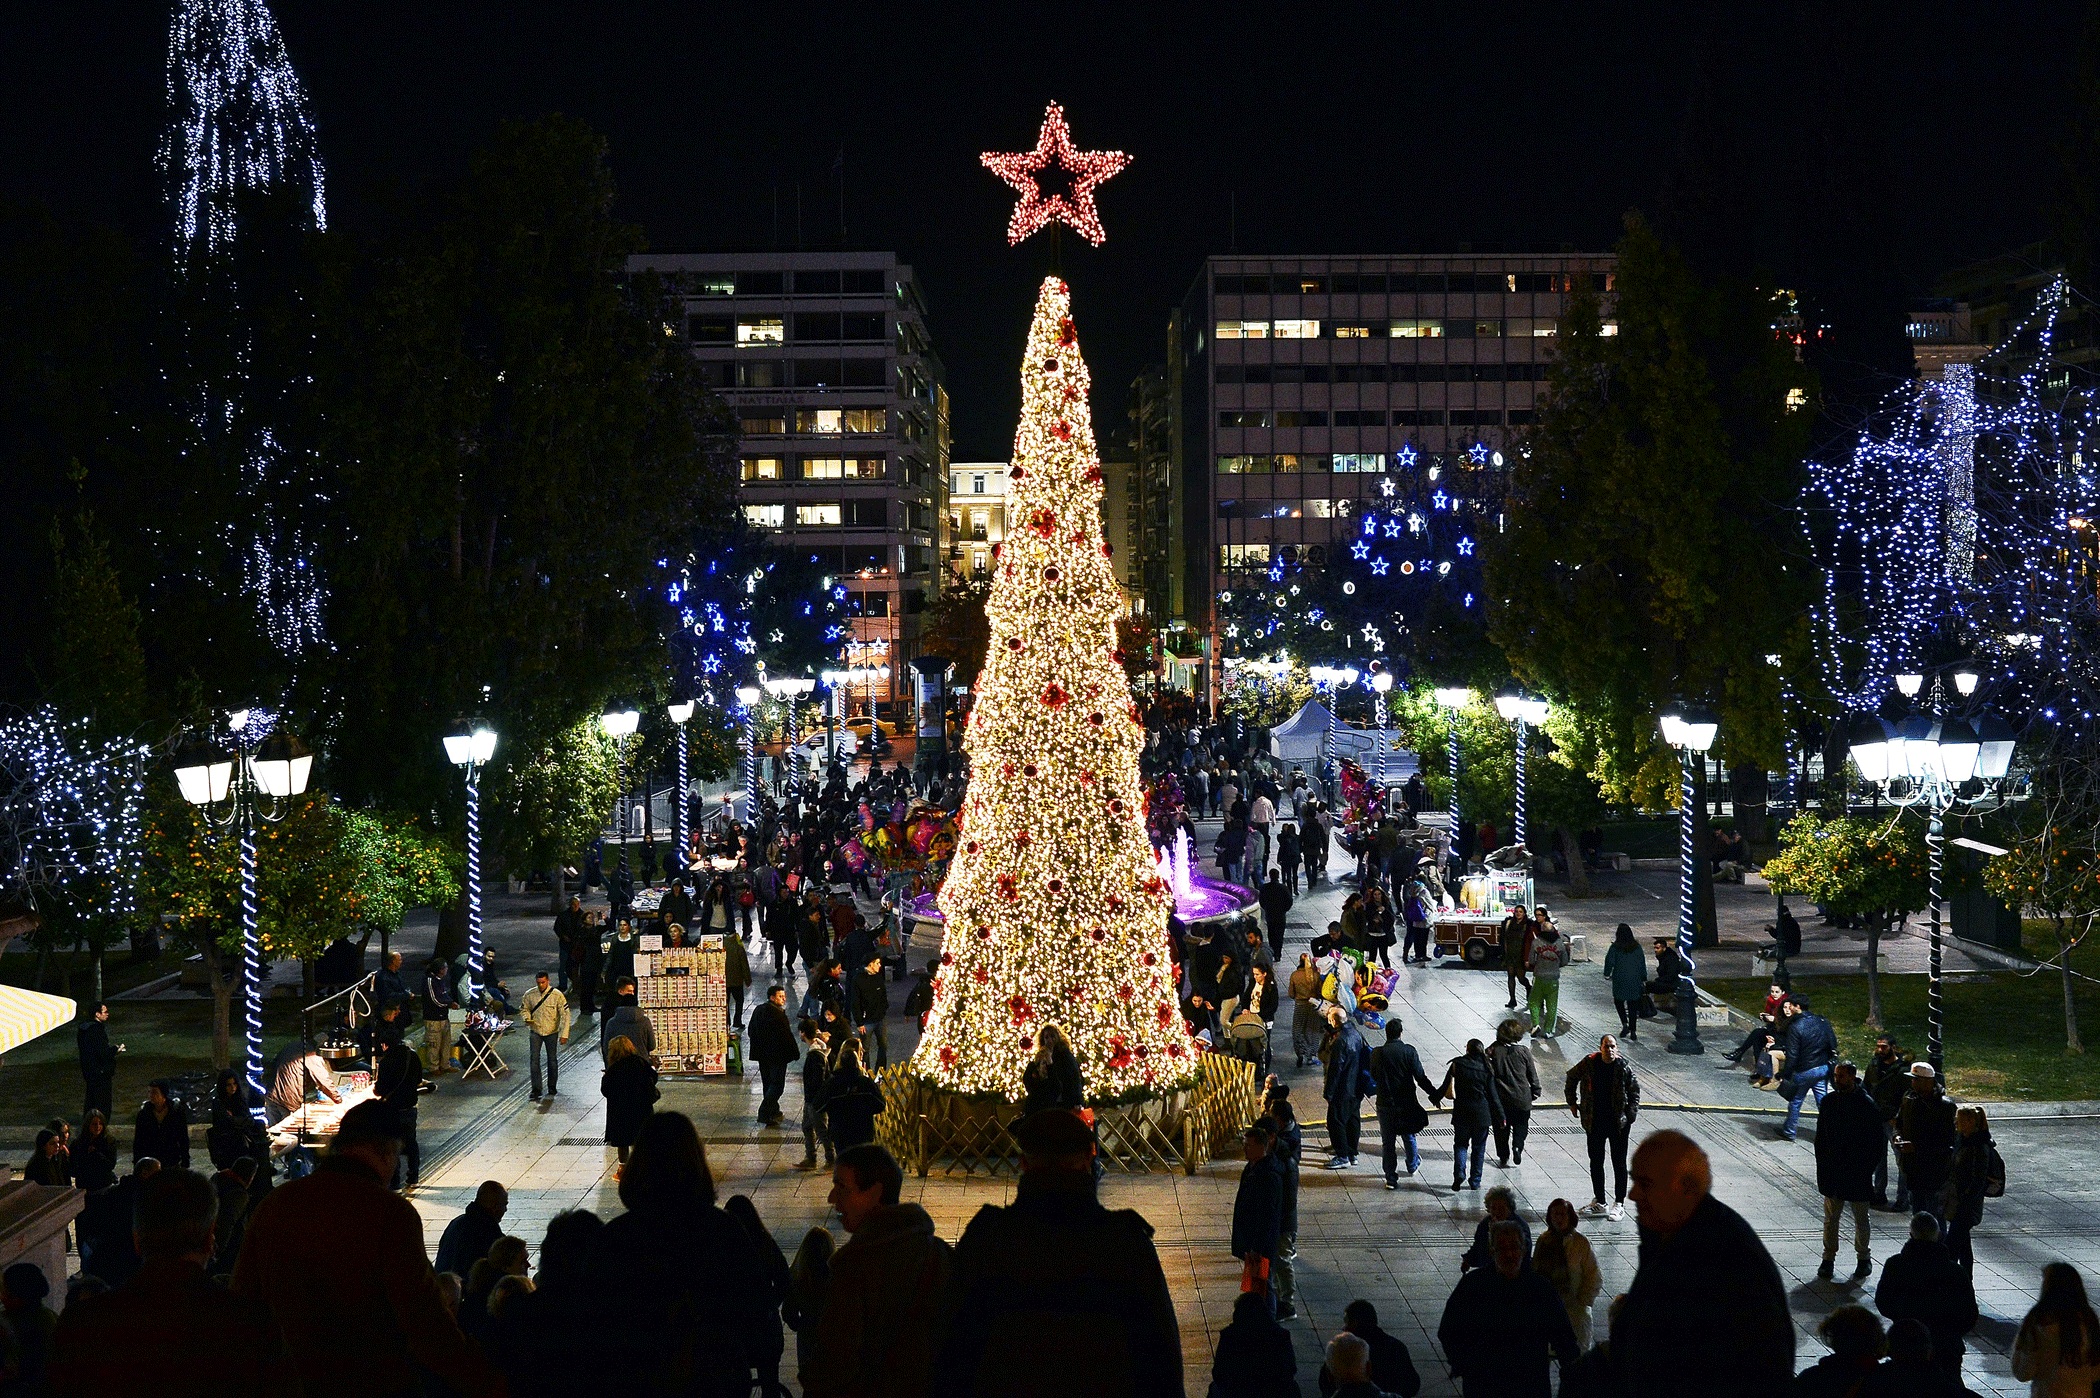 A Christmas tree at Syntagma Square in front of the Greek parliament in Athens on Dec. 15, 2015.